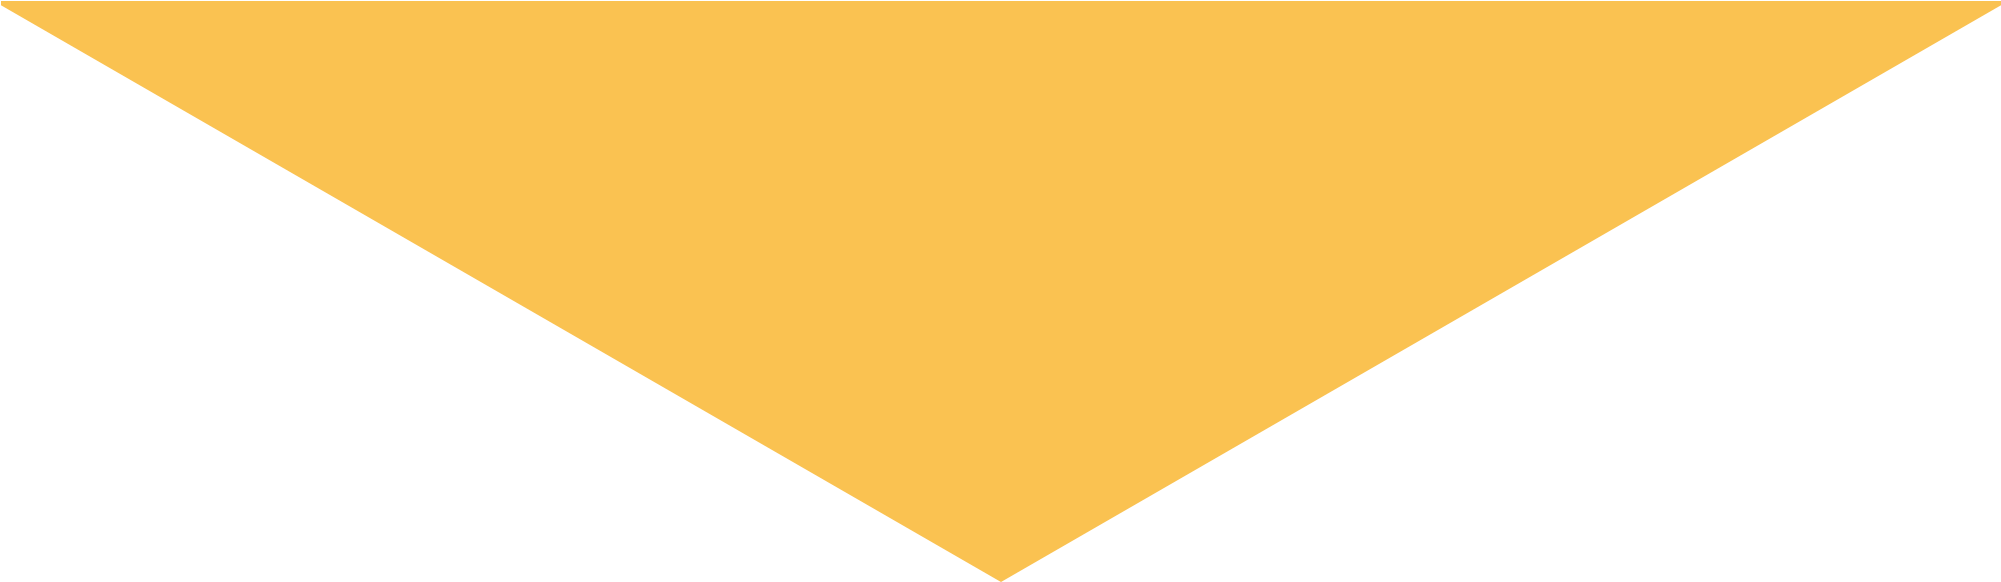 On 22 May 2017 A Bomb Exploded At Manchester Arena - Yellow Triangle Png (2000x595), Png Download